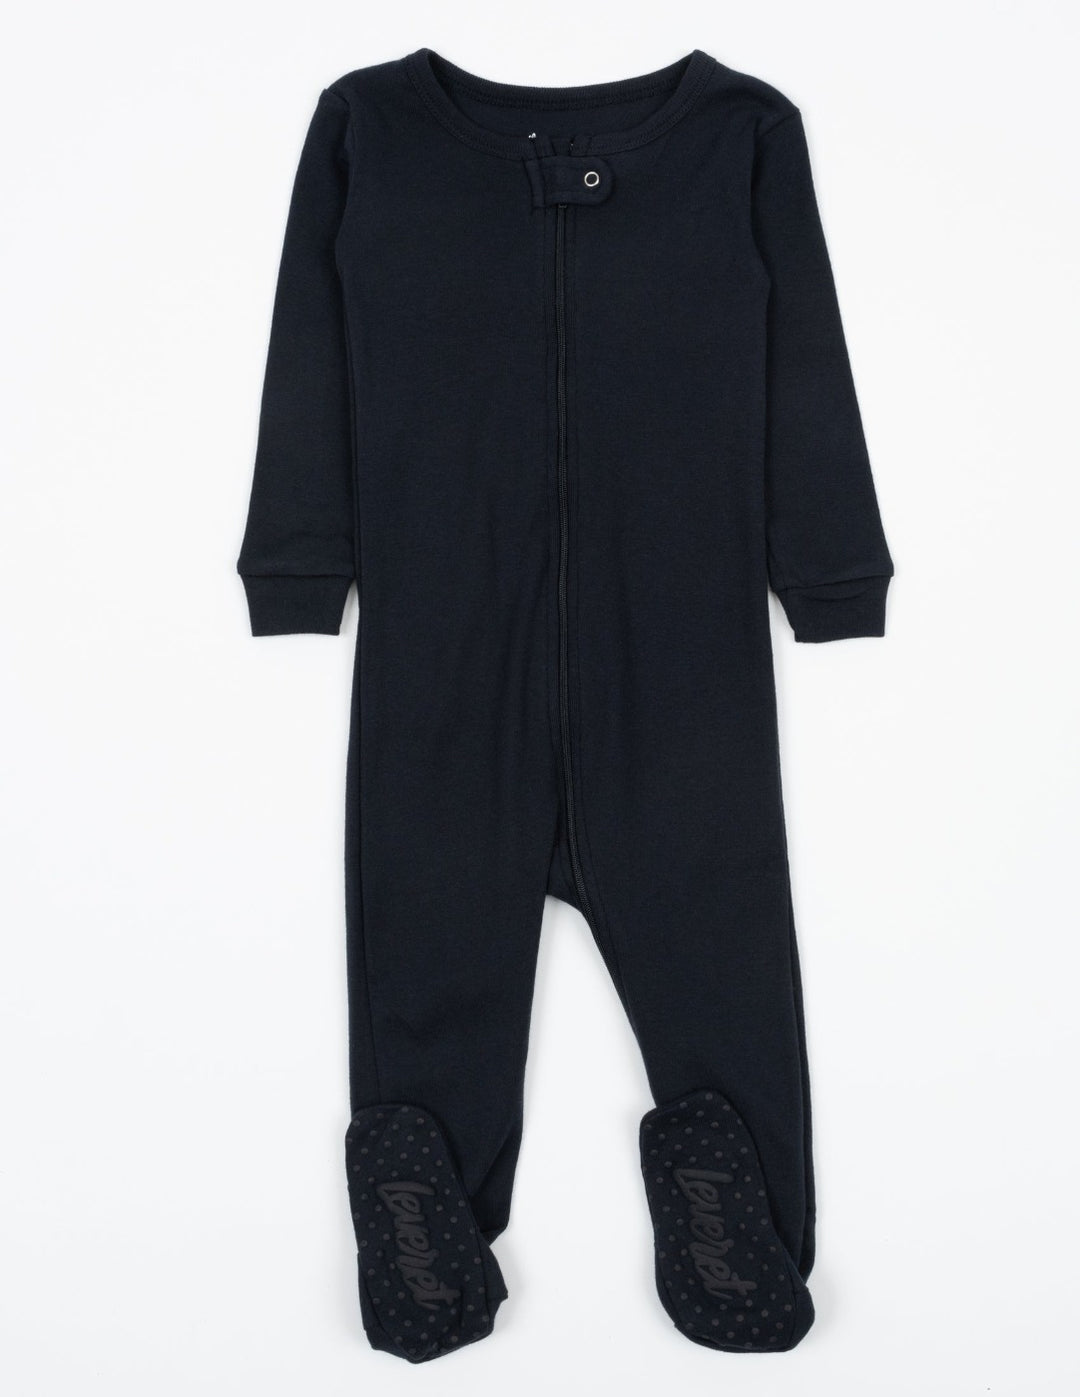 solid color navy baby footed pajama